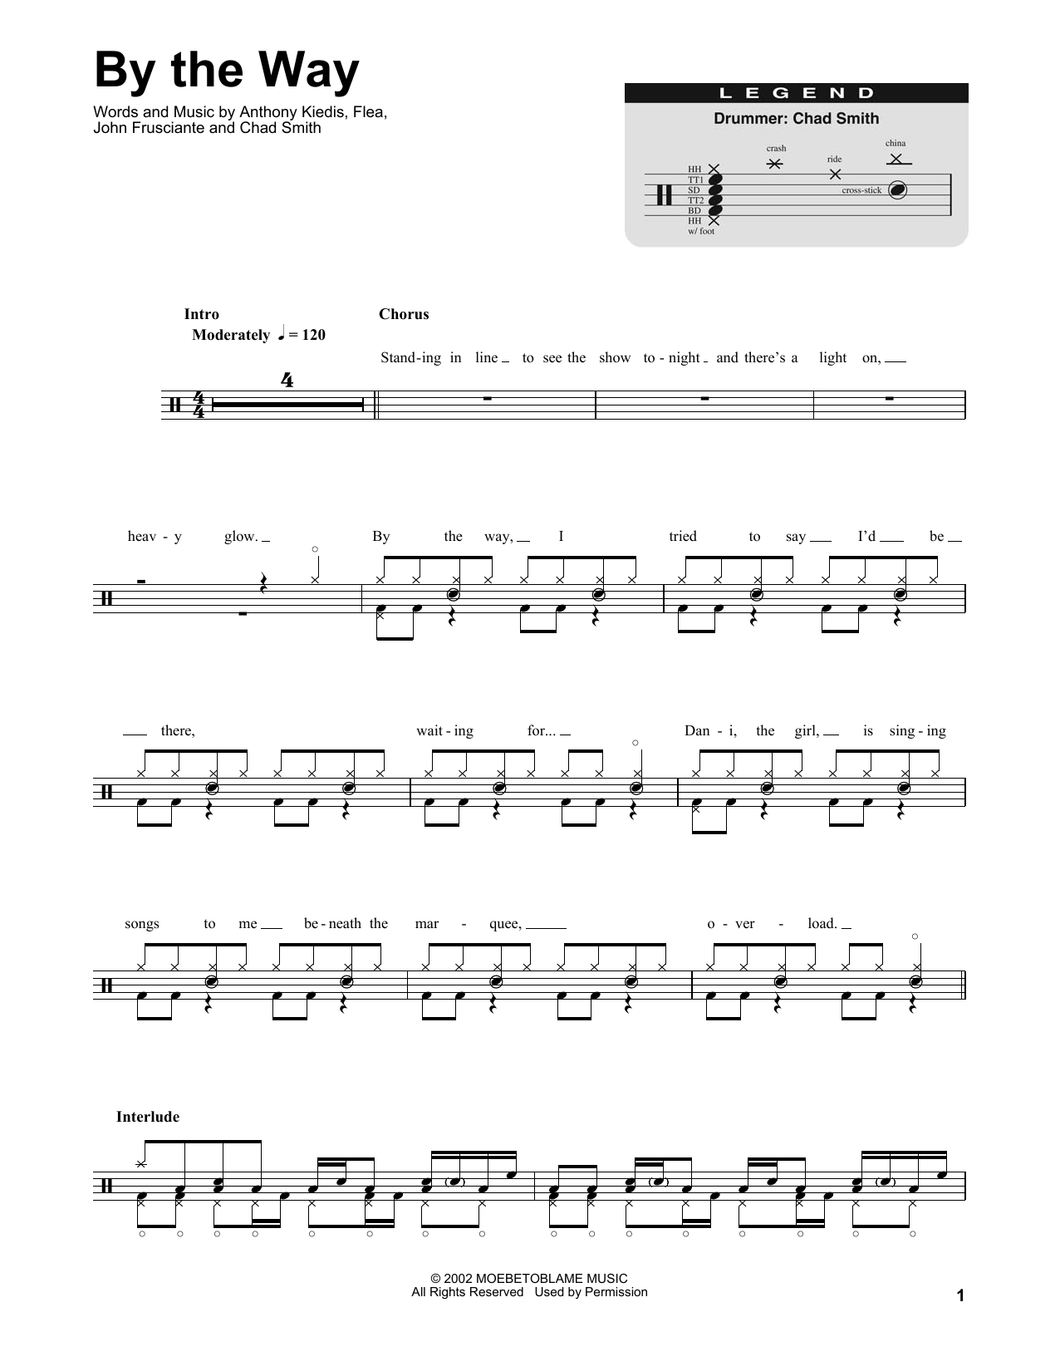 By the Way - Red Hot Chili Peppers - Full Drum Transcription / Drum Sheet Music - SheetMusicDirect DT175517